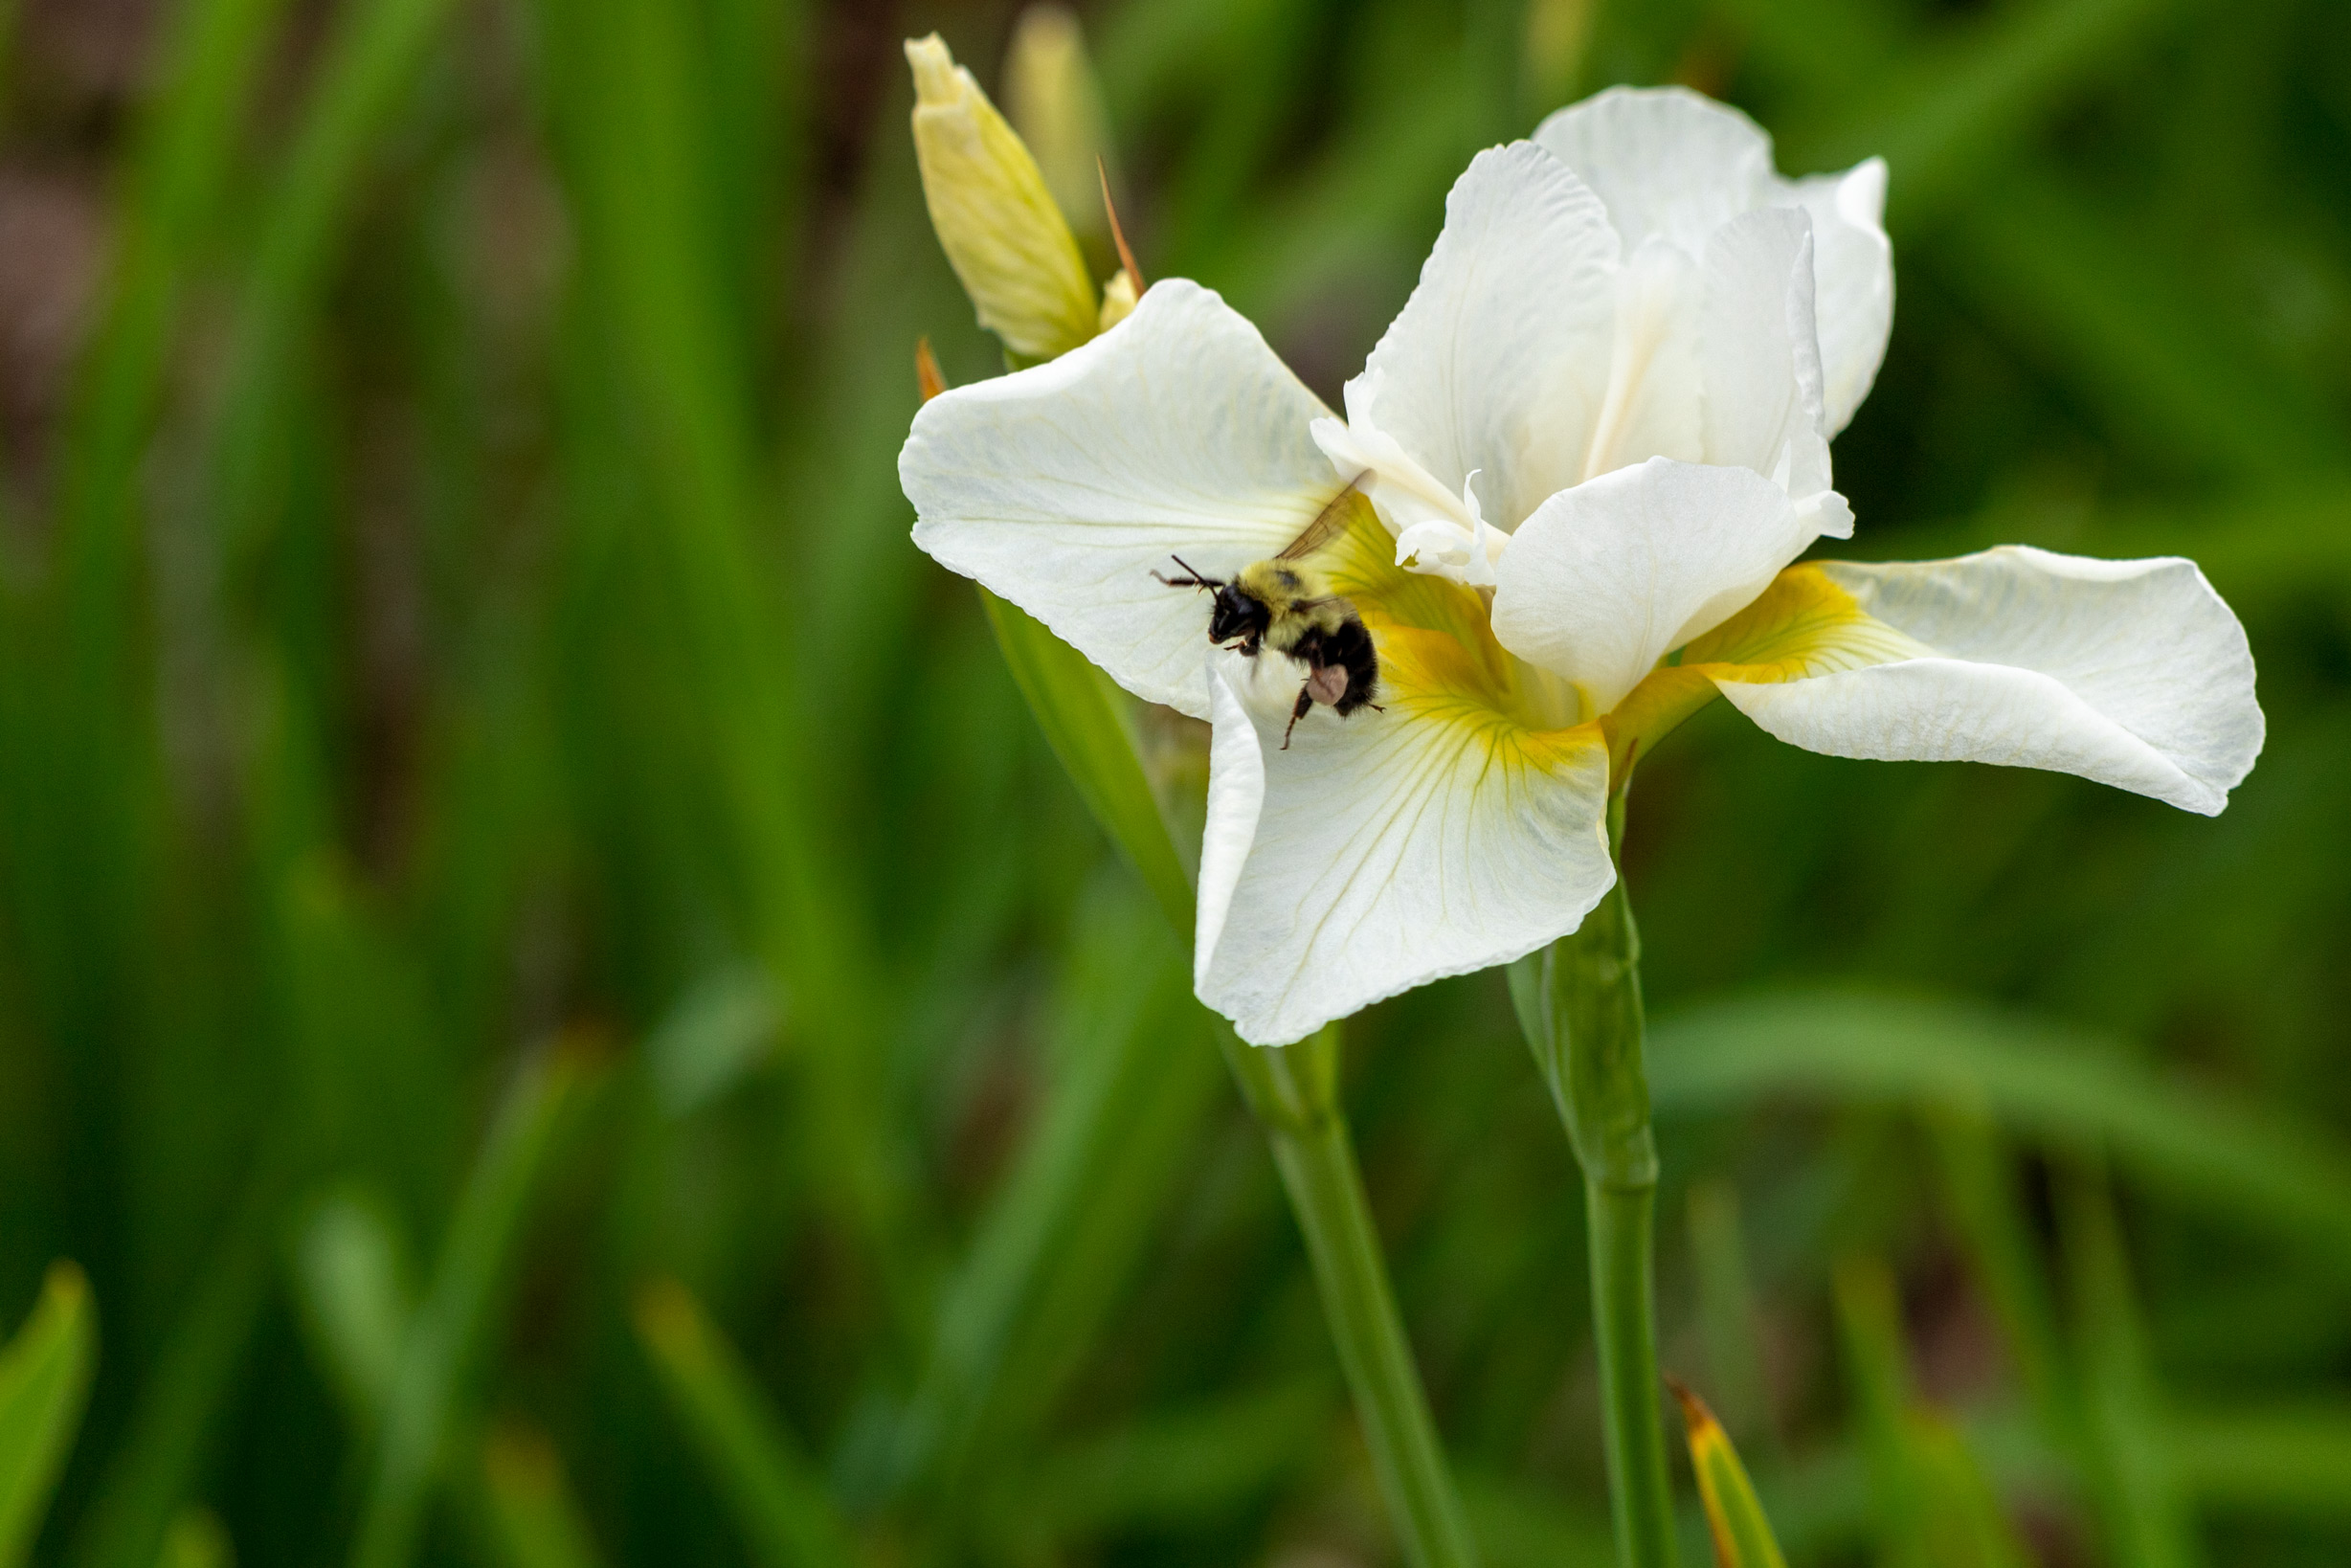 Bumble bee beginning to fly off of a white iris